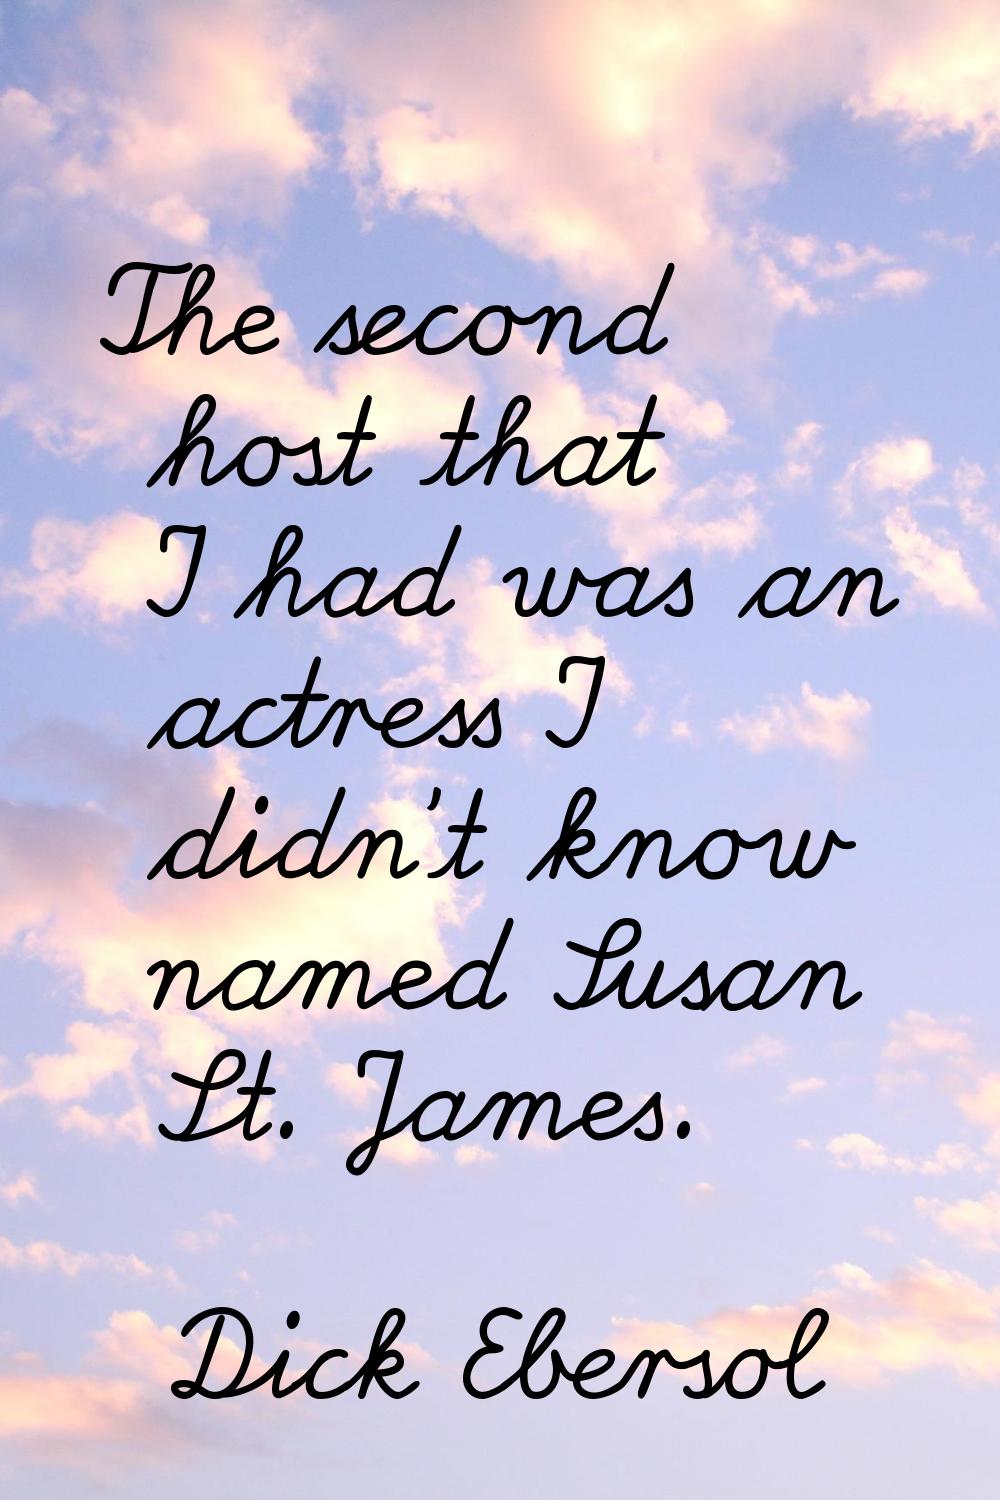 The second host that I had was an actress I didn't know named Susan St. James.